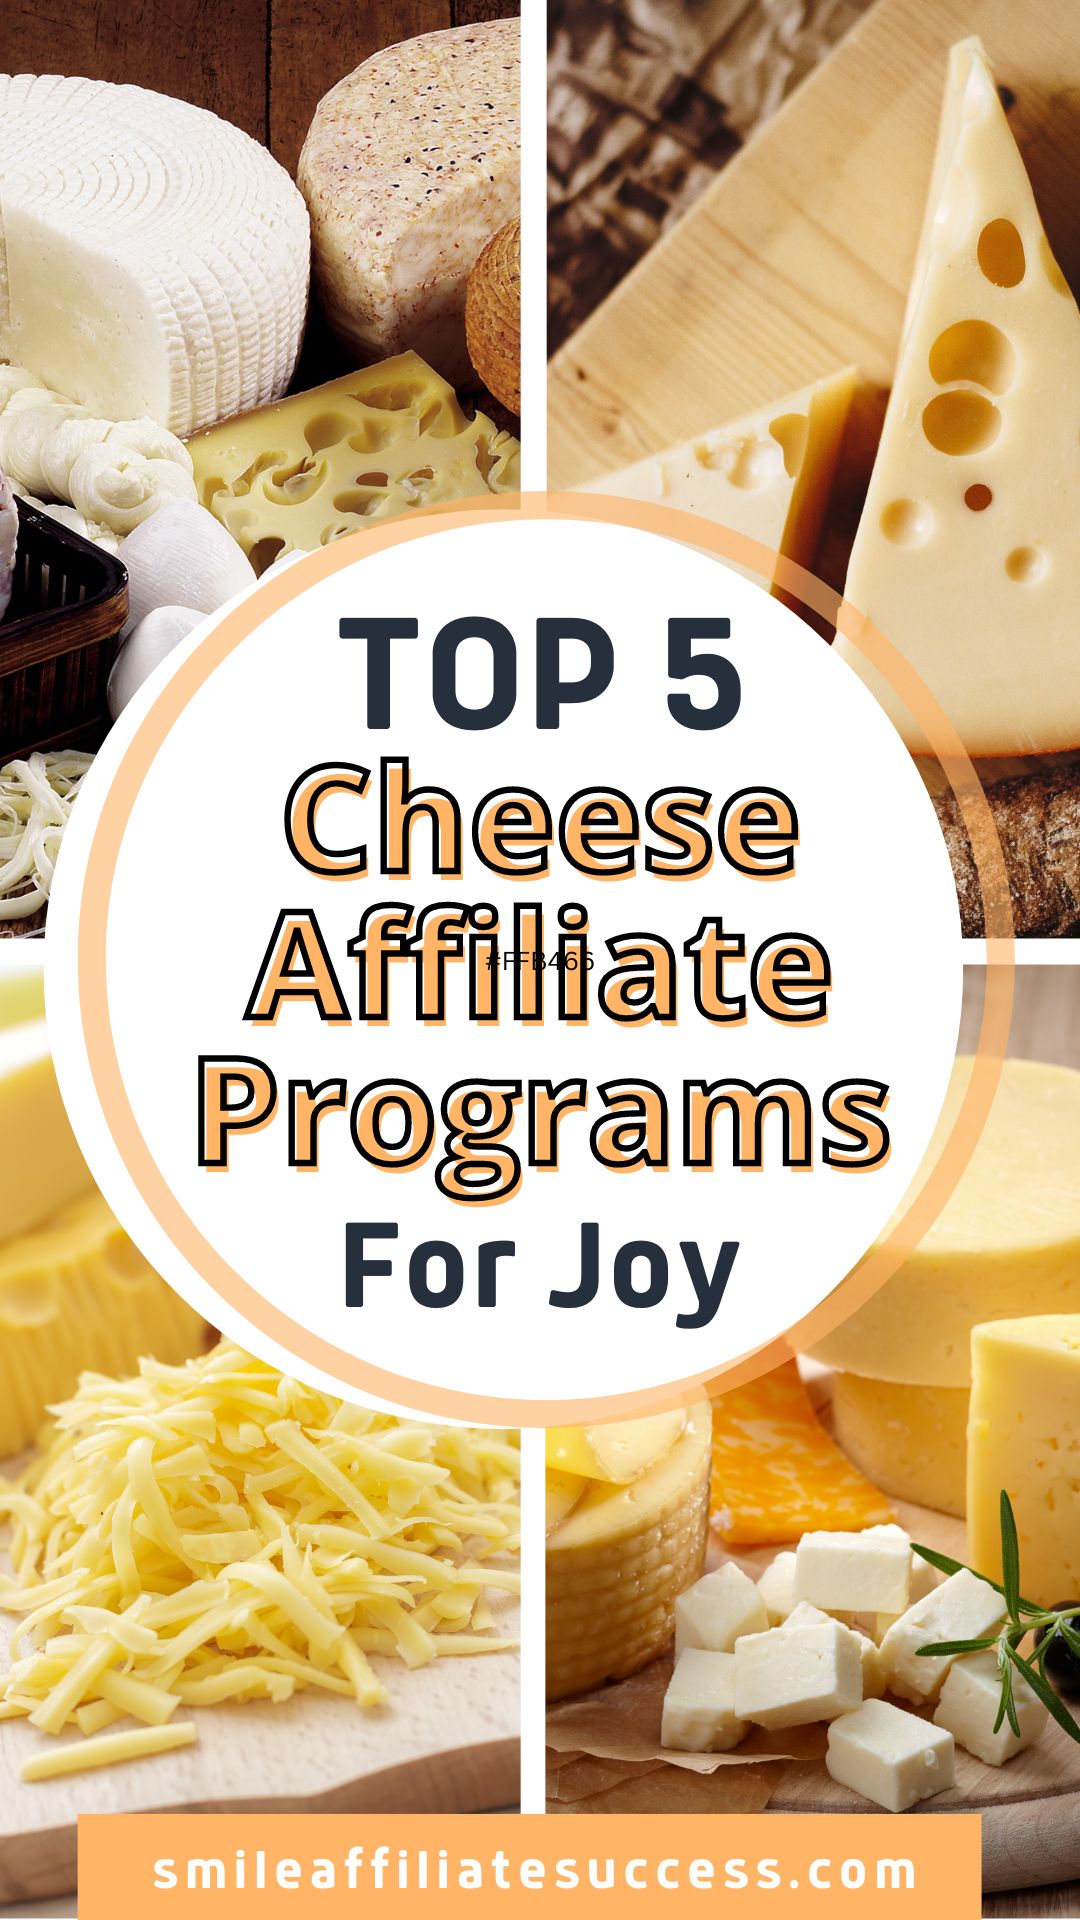 Top 5 Cheese Affiliate Programs! Say Cheese!!